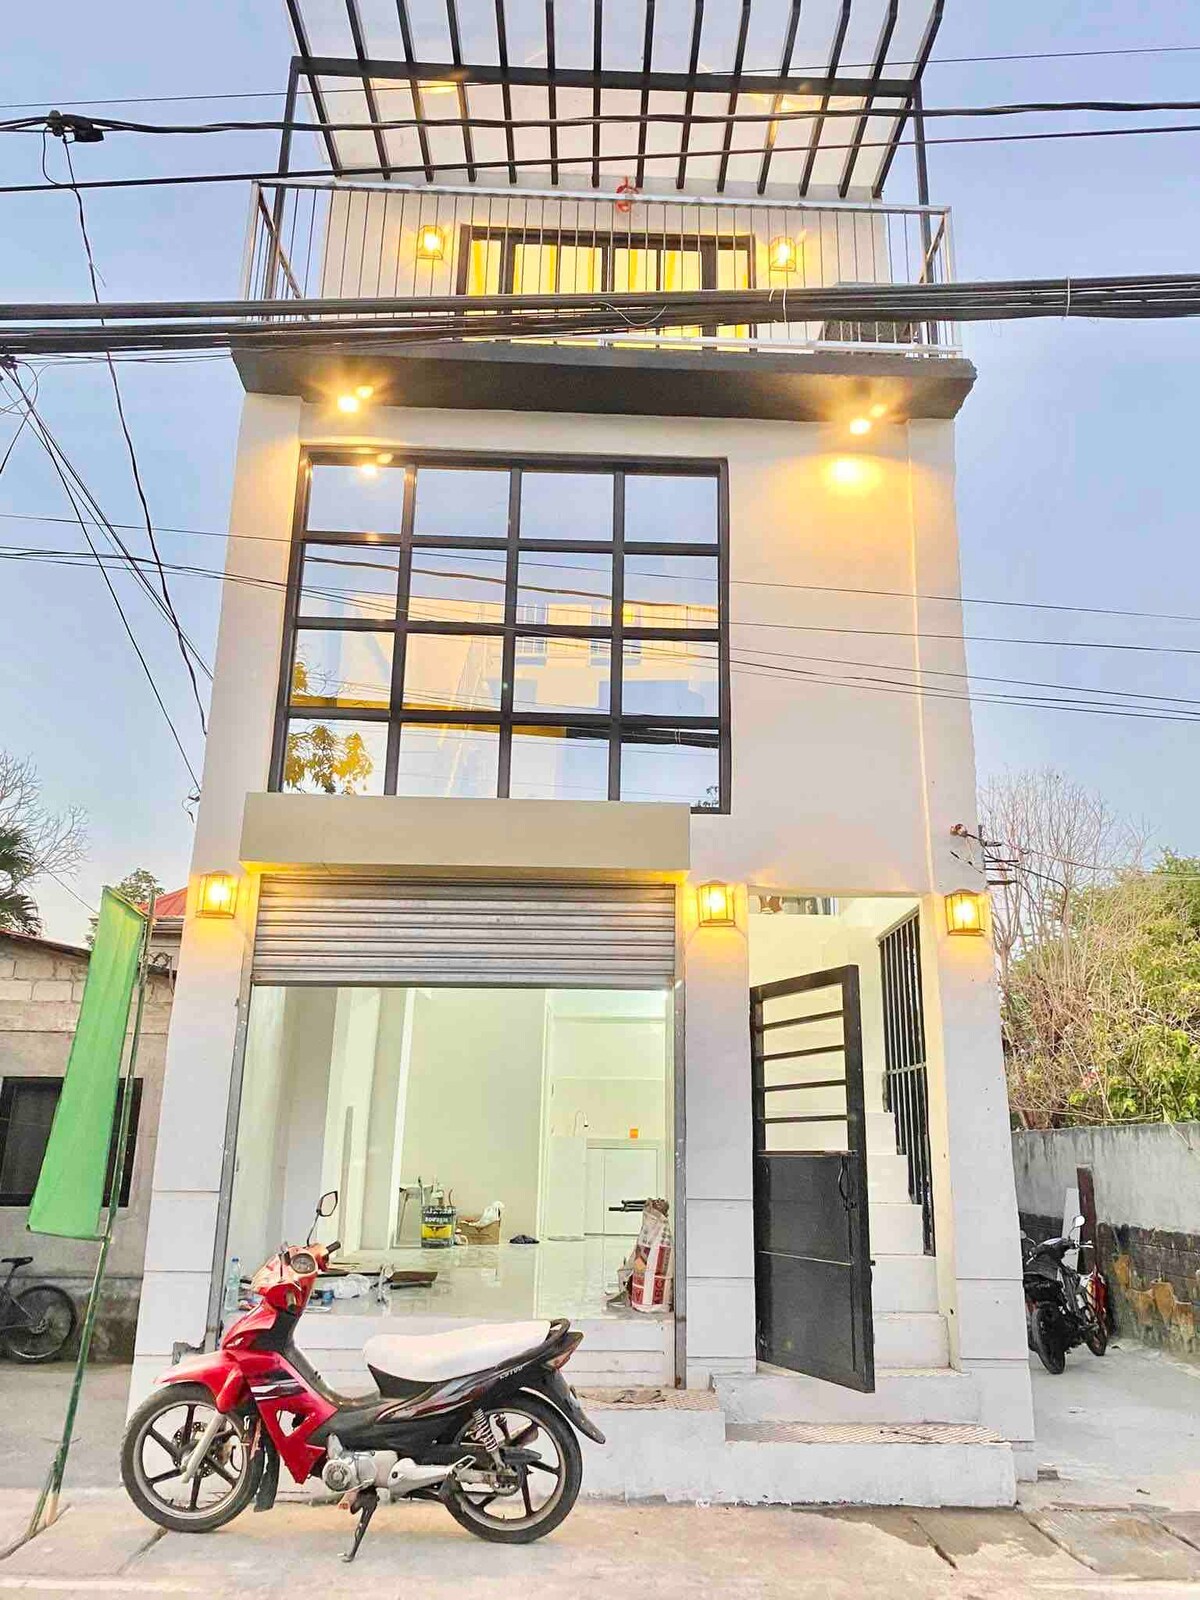 Entire loft-style house with own balcony